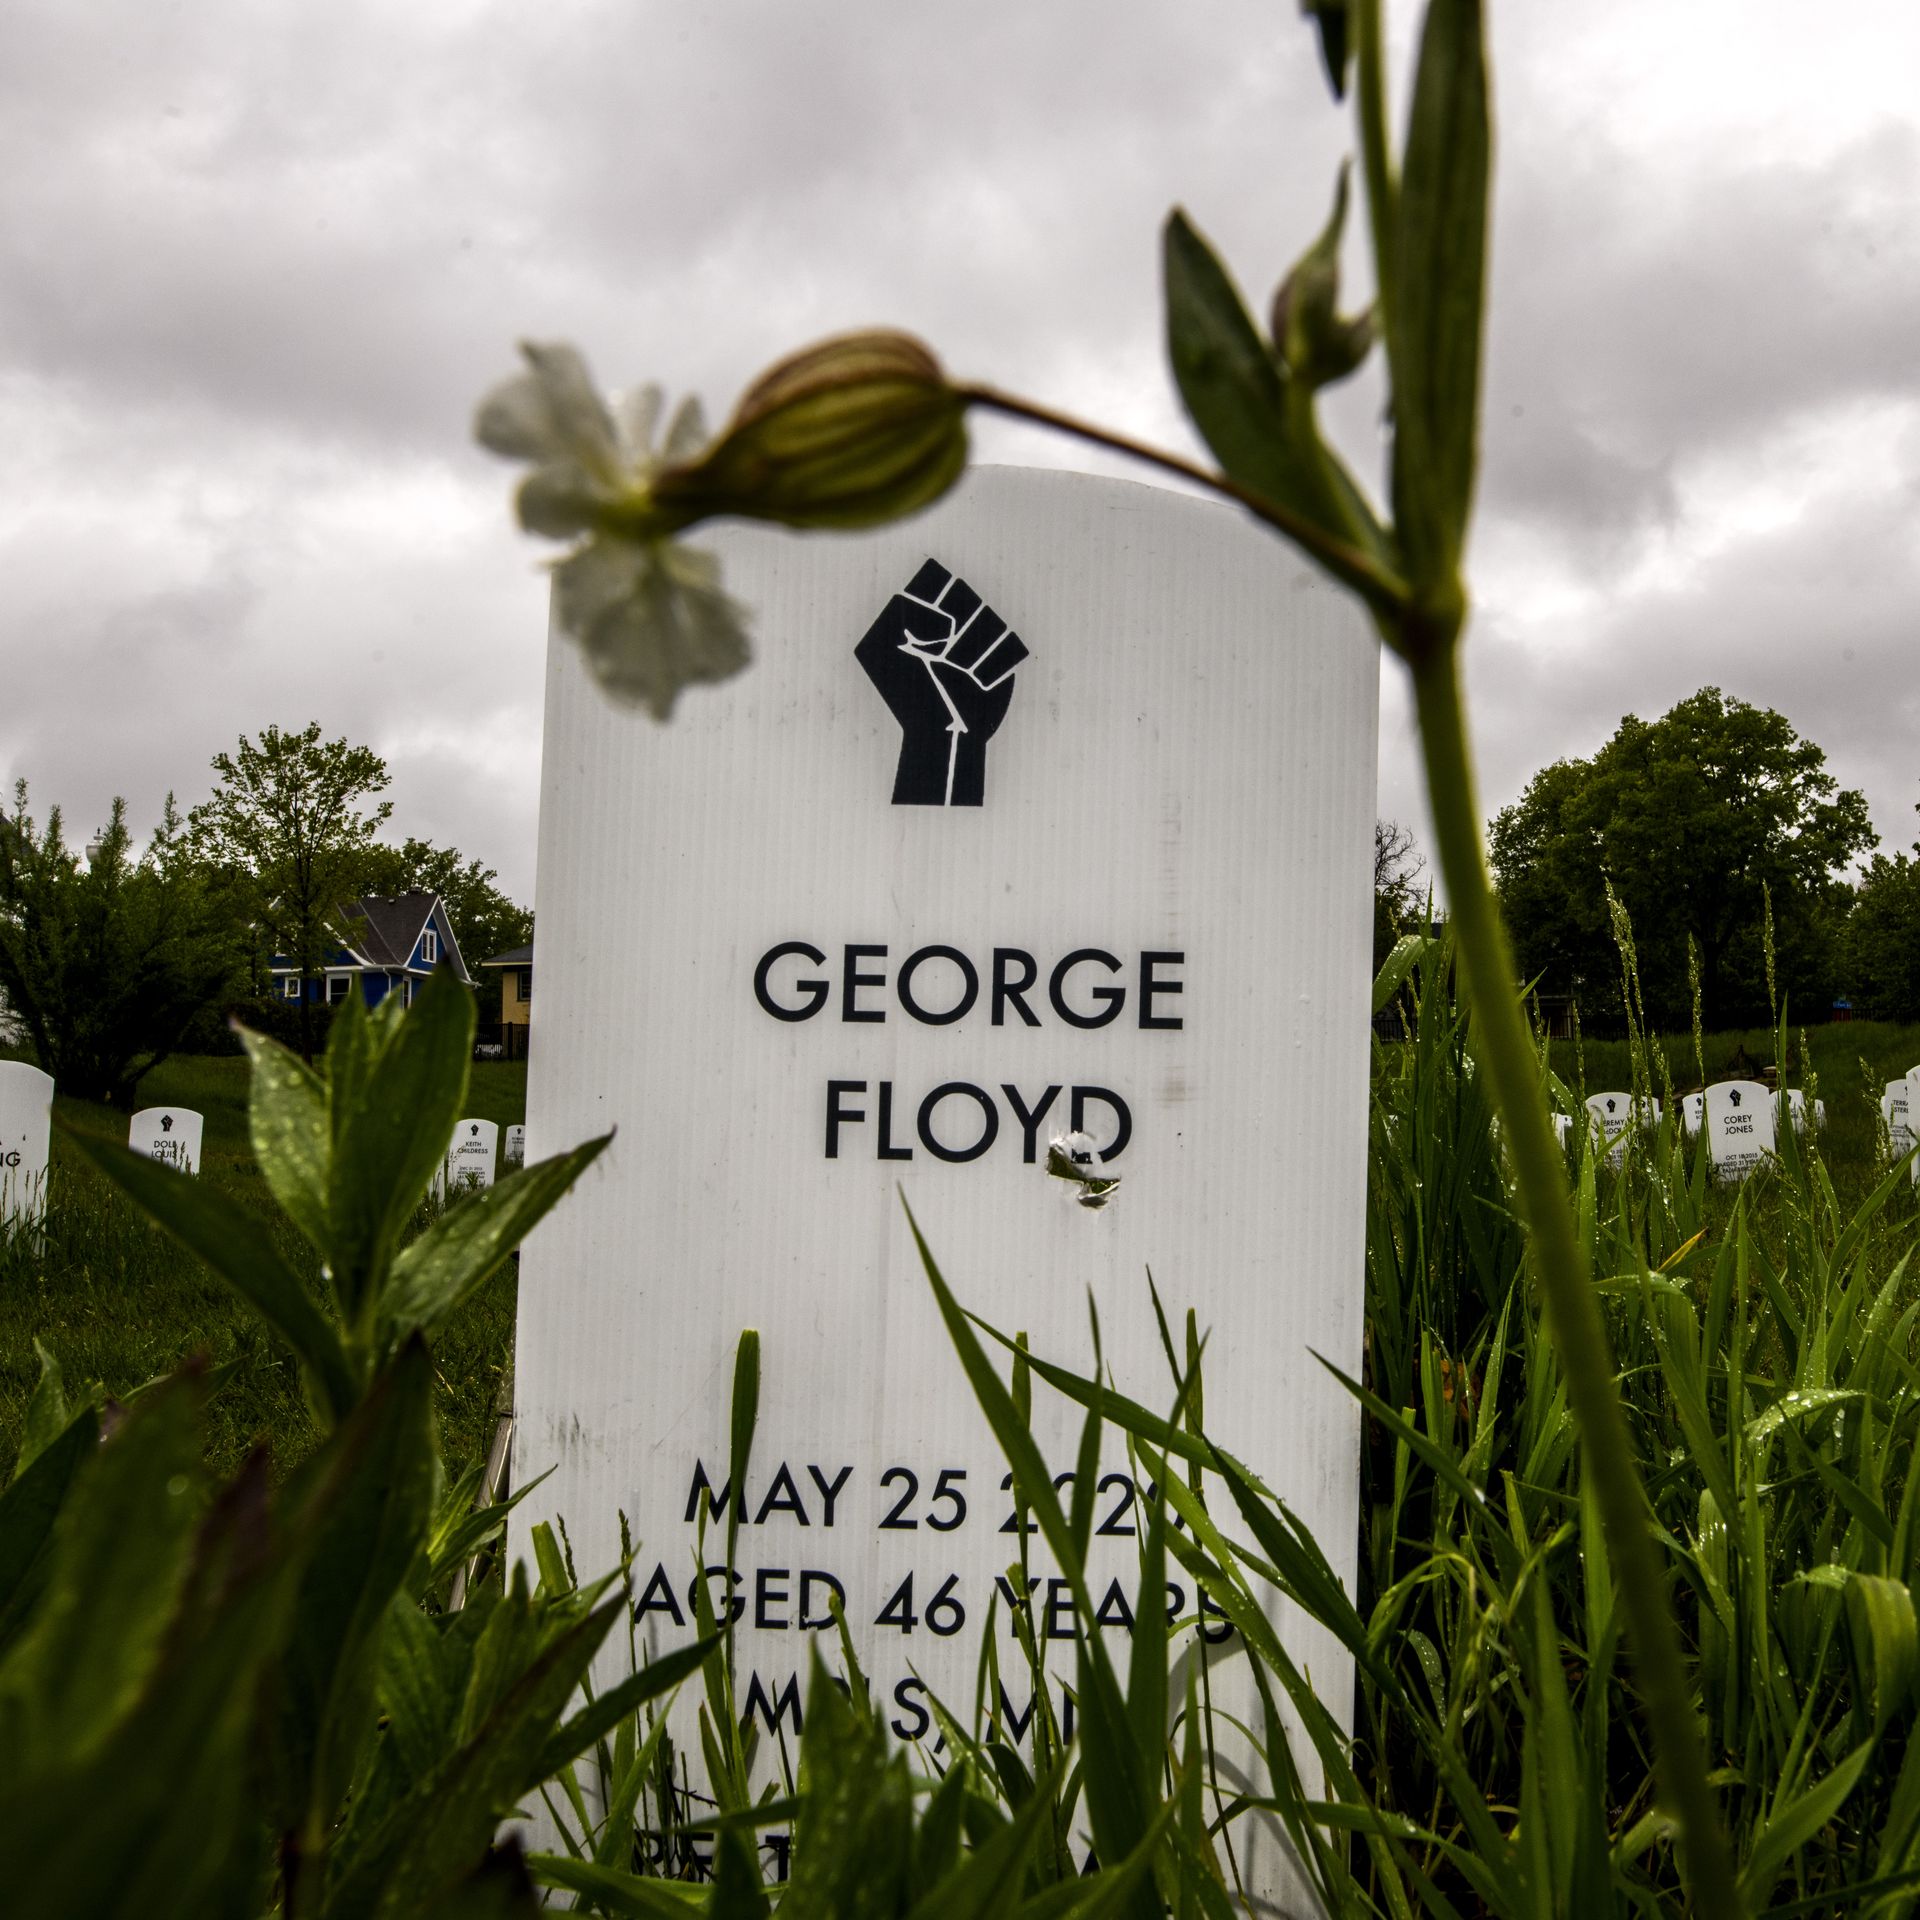 Photo of a white gravestone with George Floyd's name and the image of a fist engraved on it